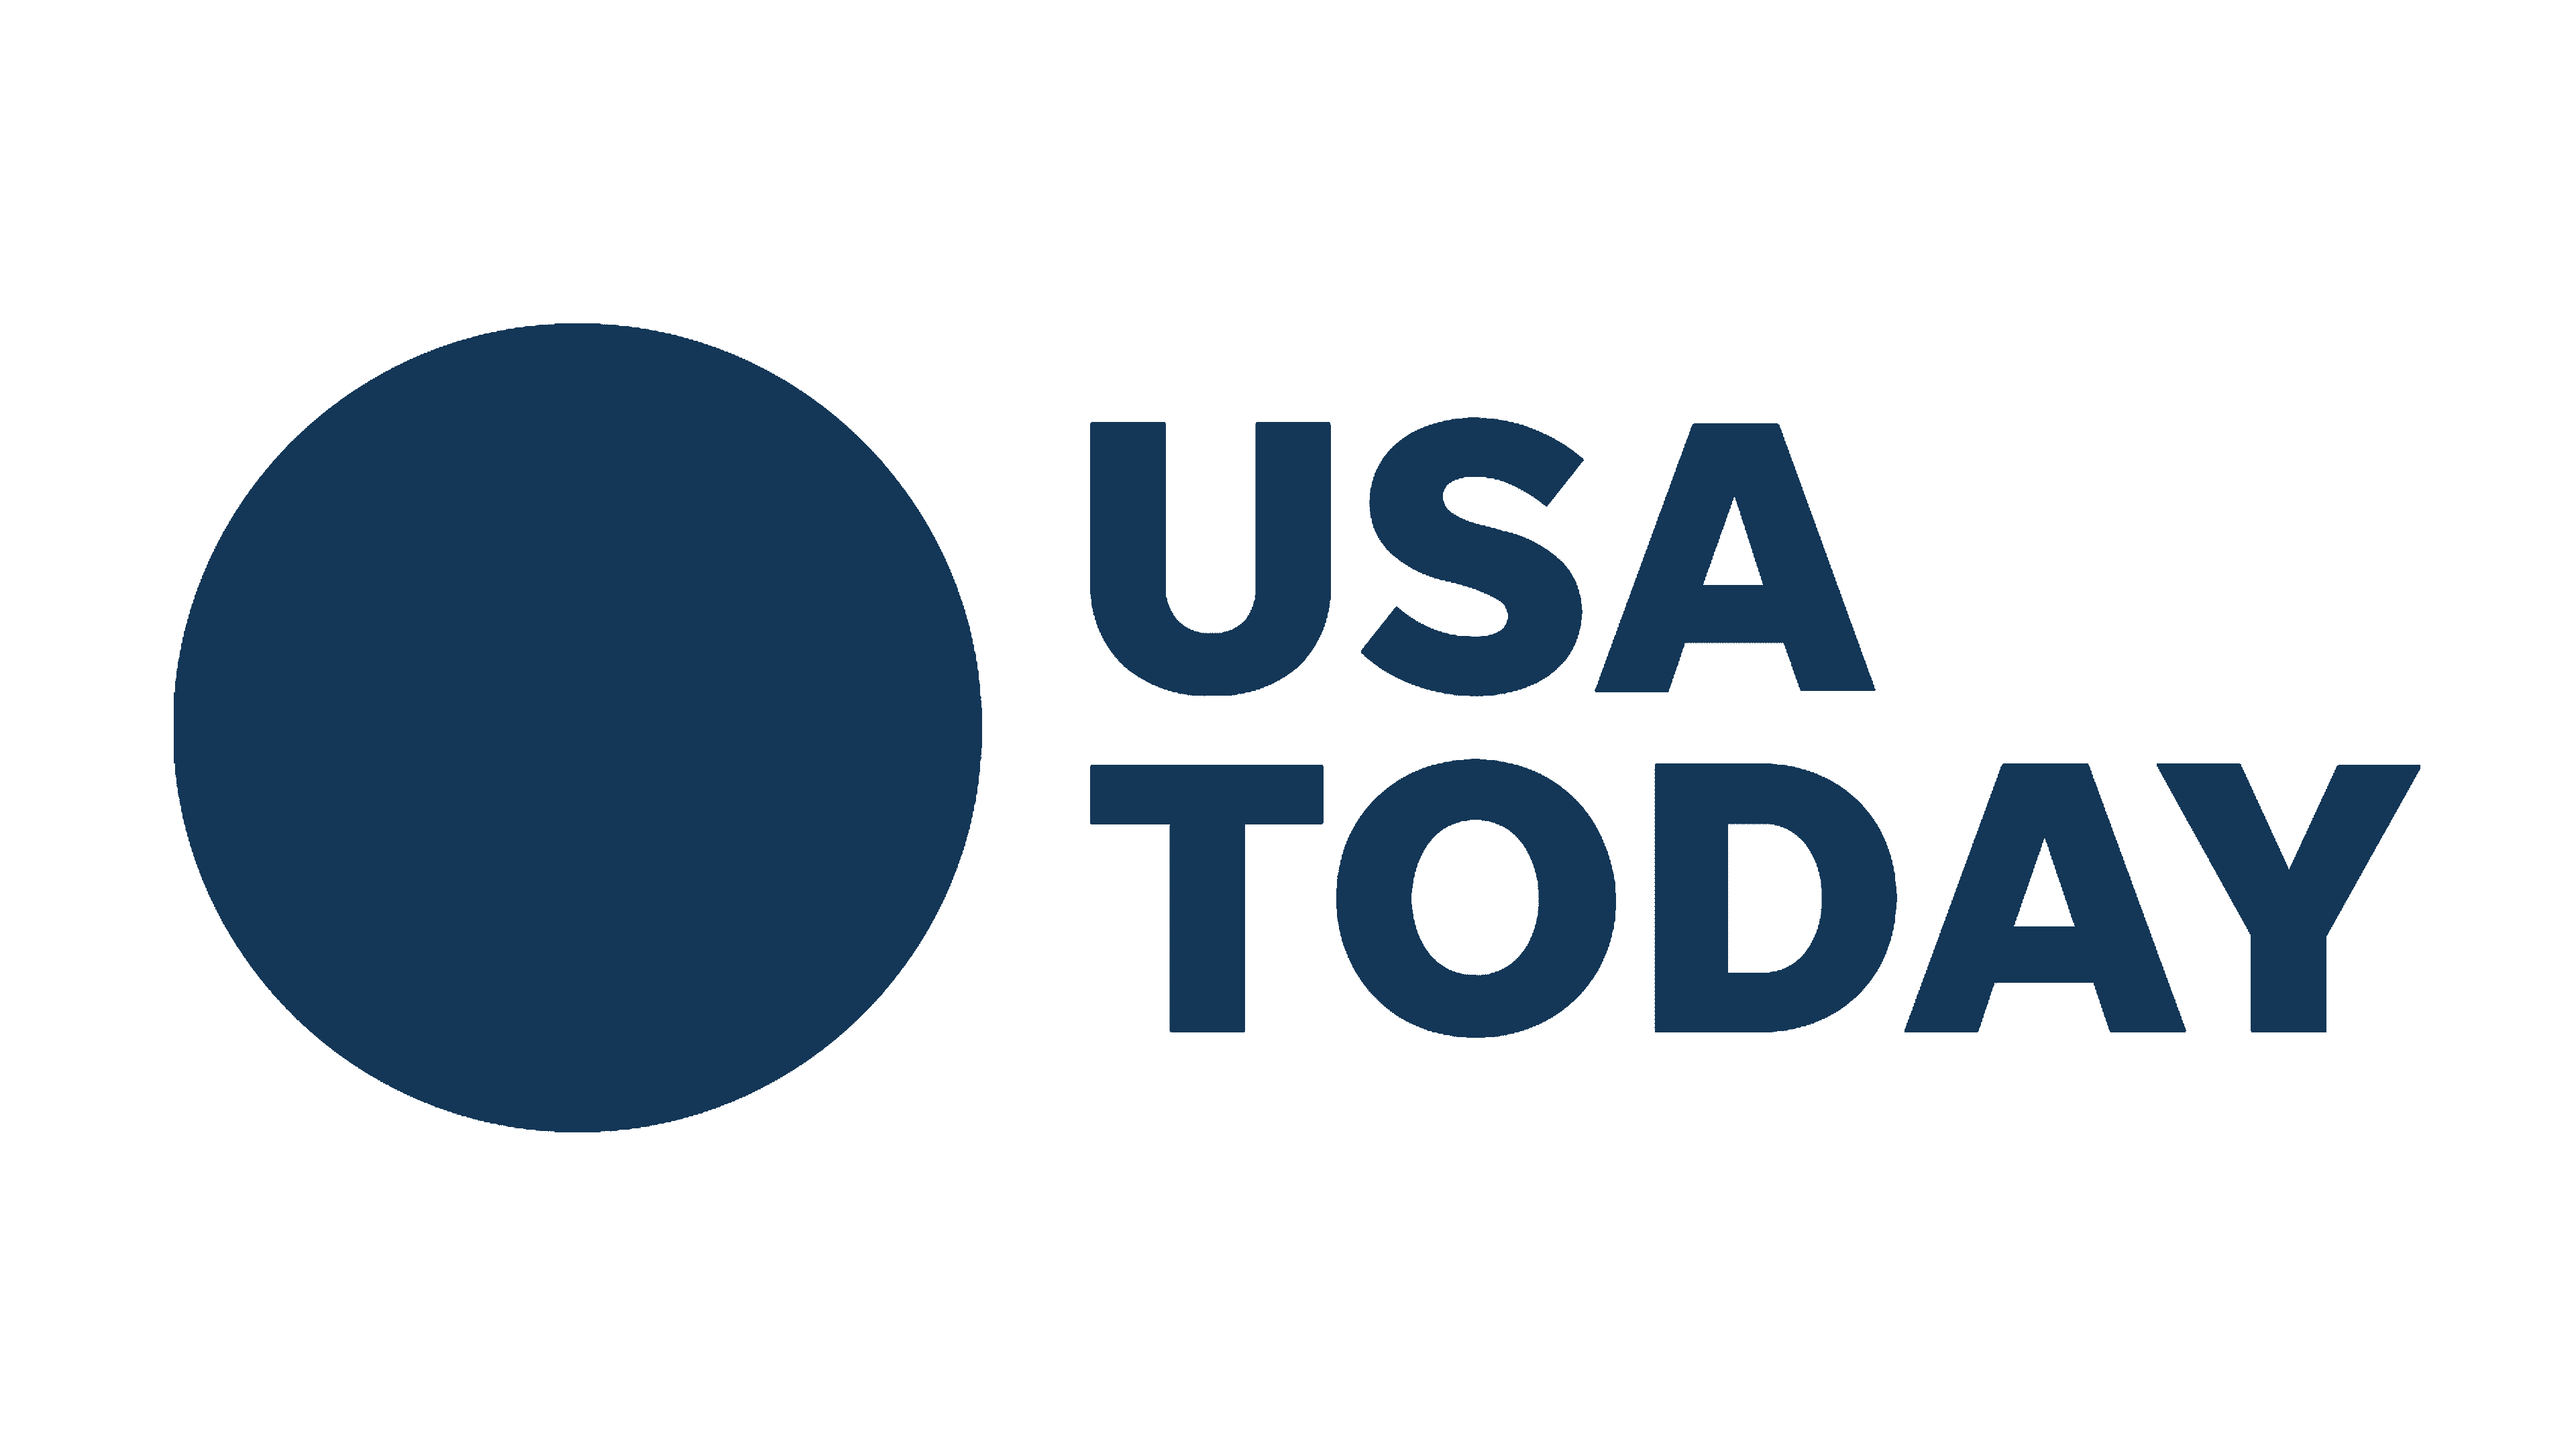 USA TODAY GRAYSCALE